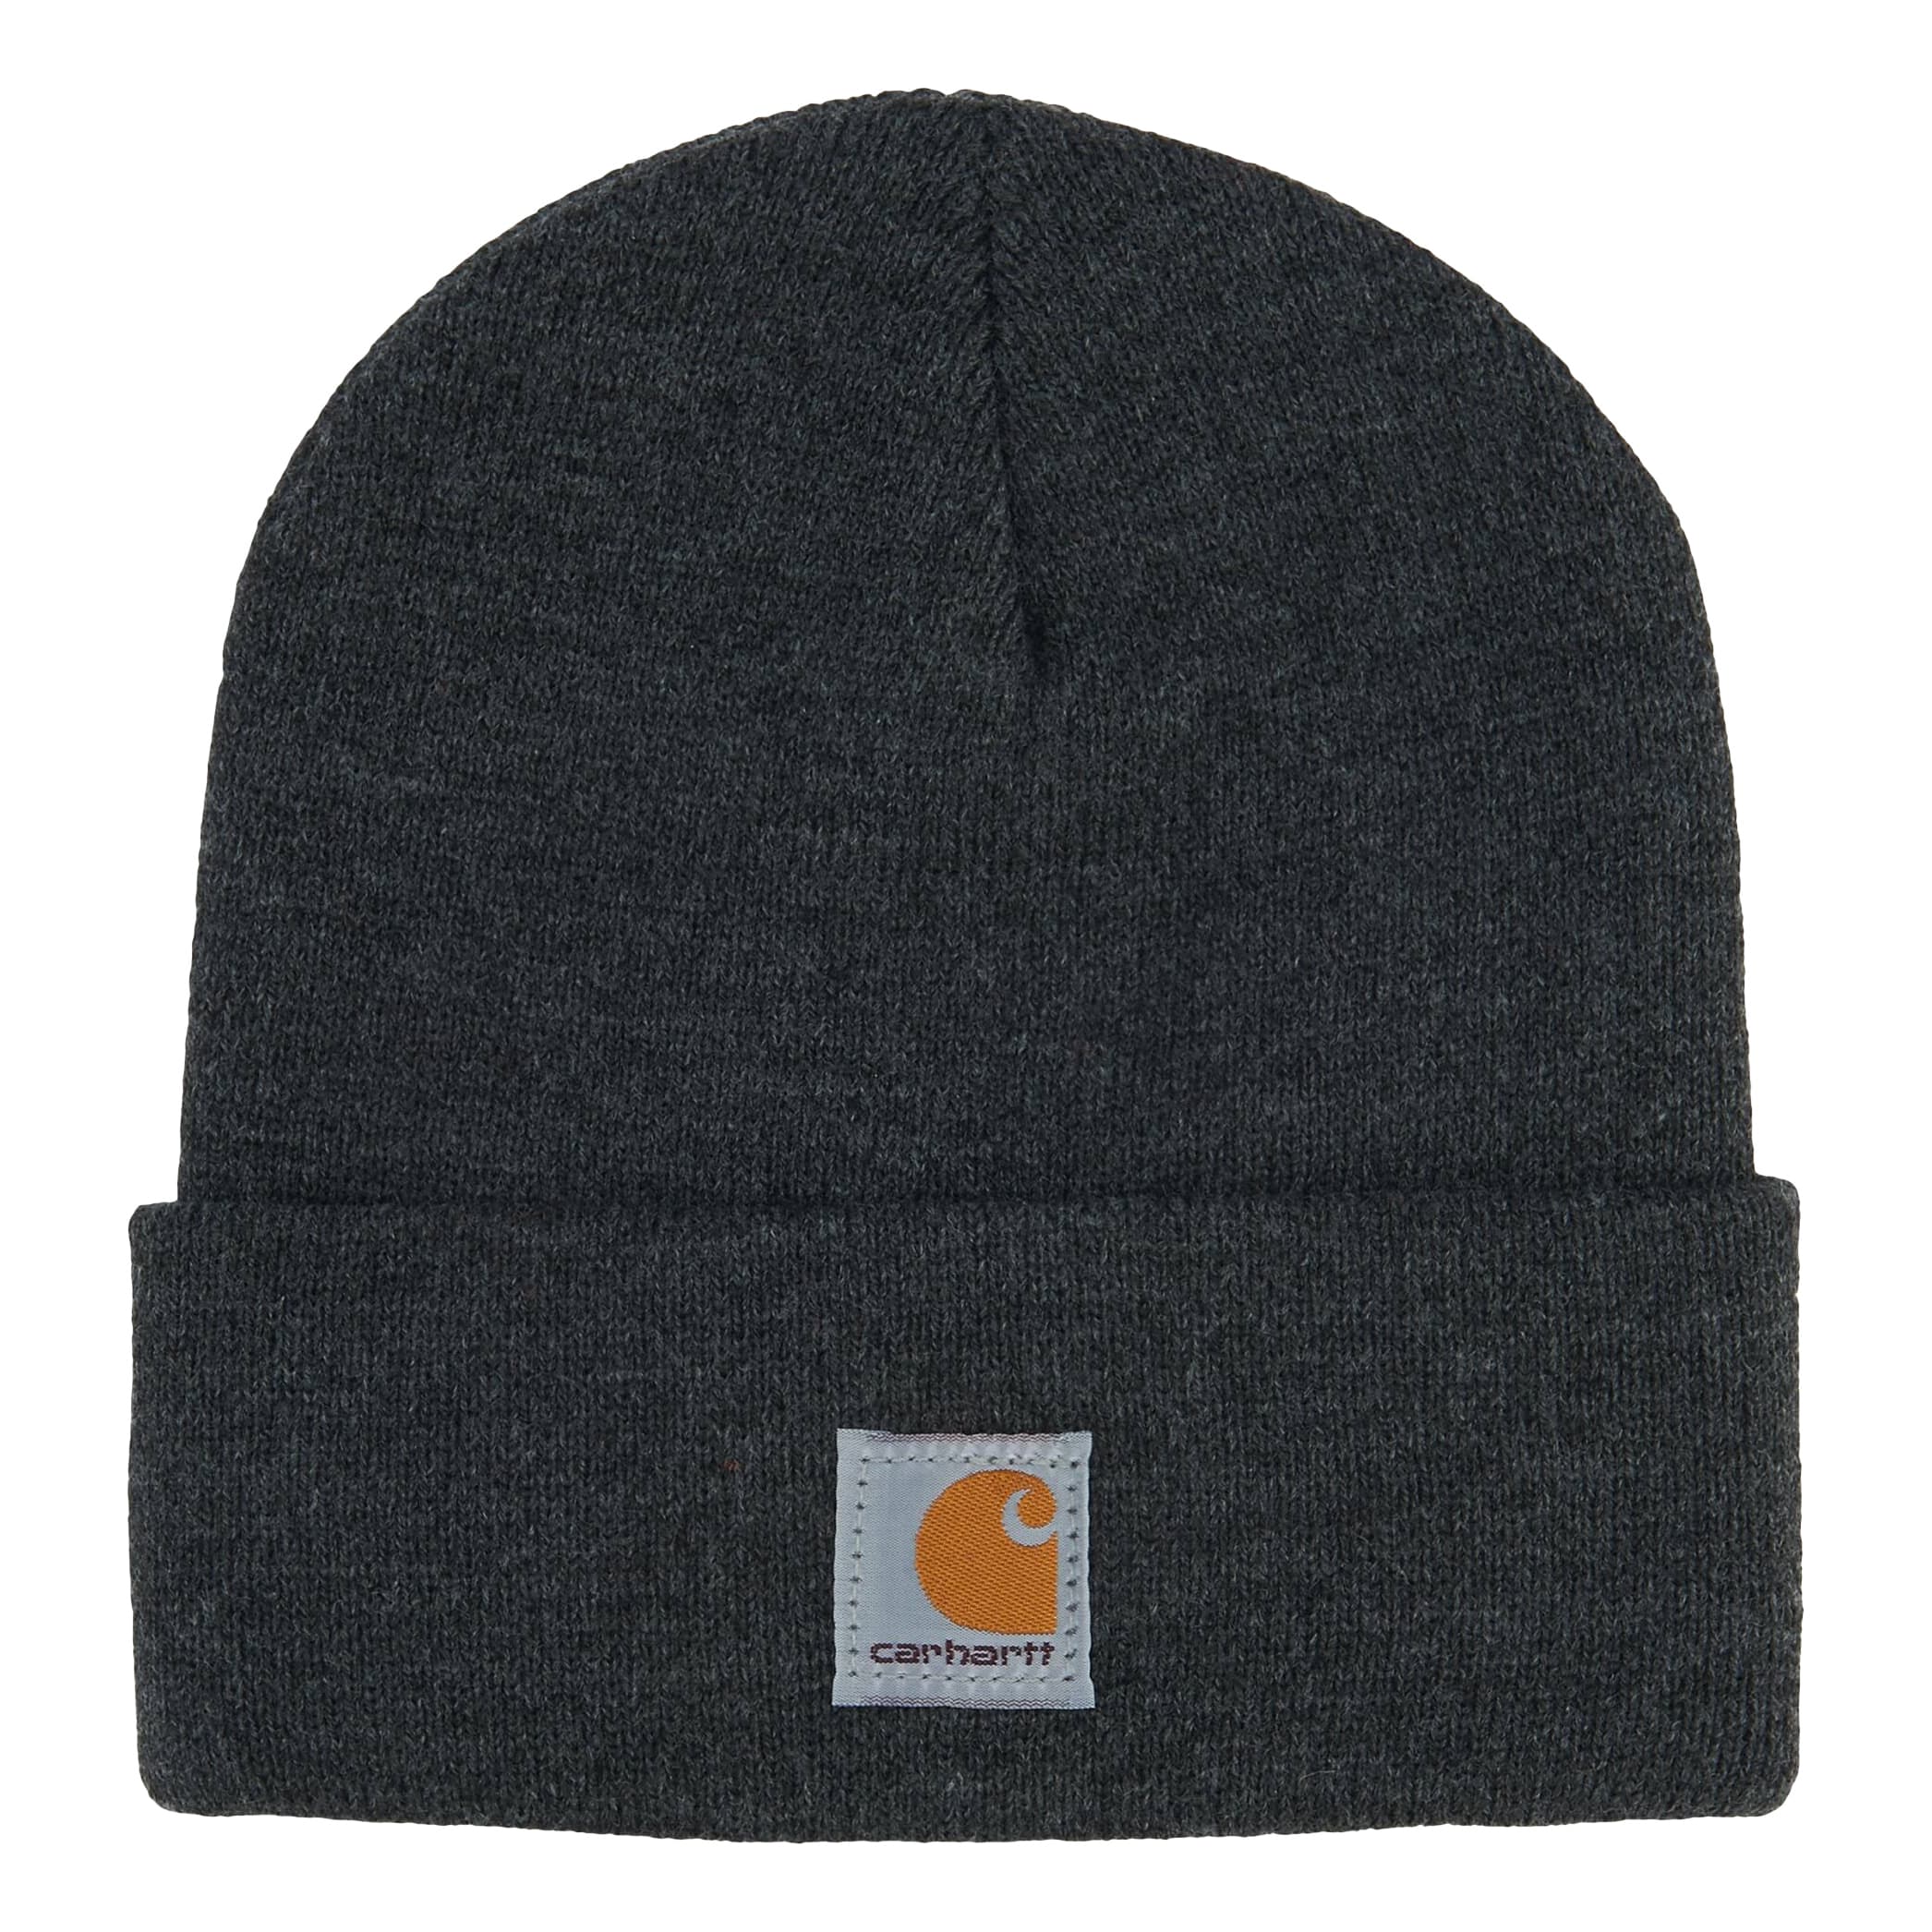 Carhartt® Youth Acrylic Watch Hat - Charcoal Heather